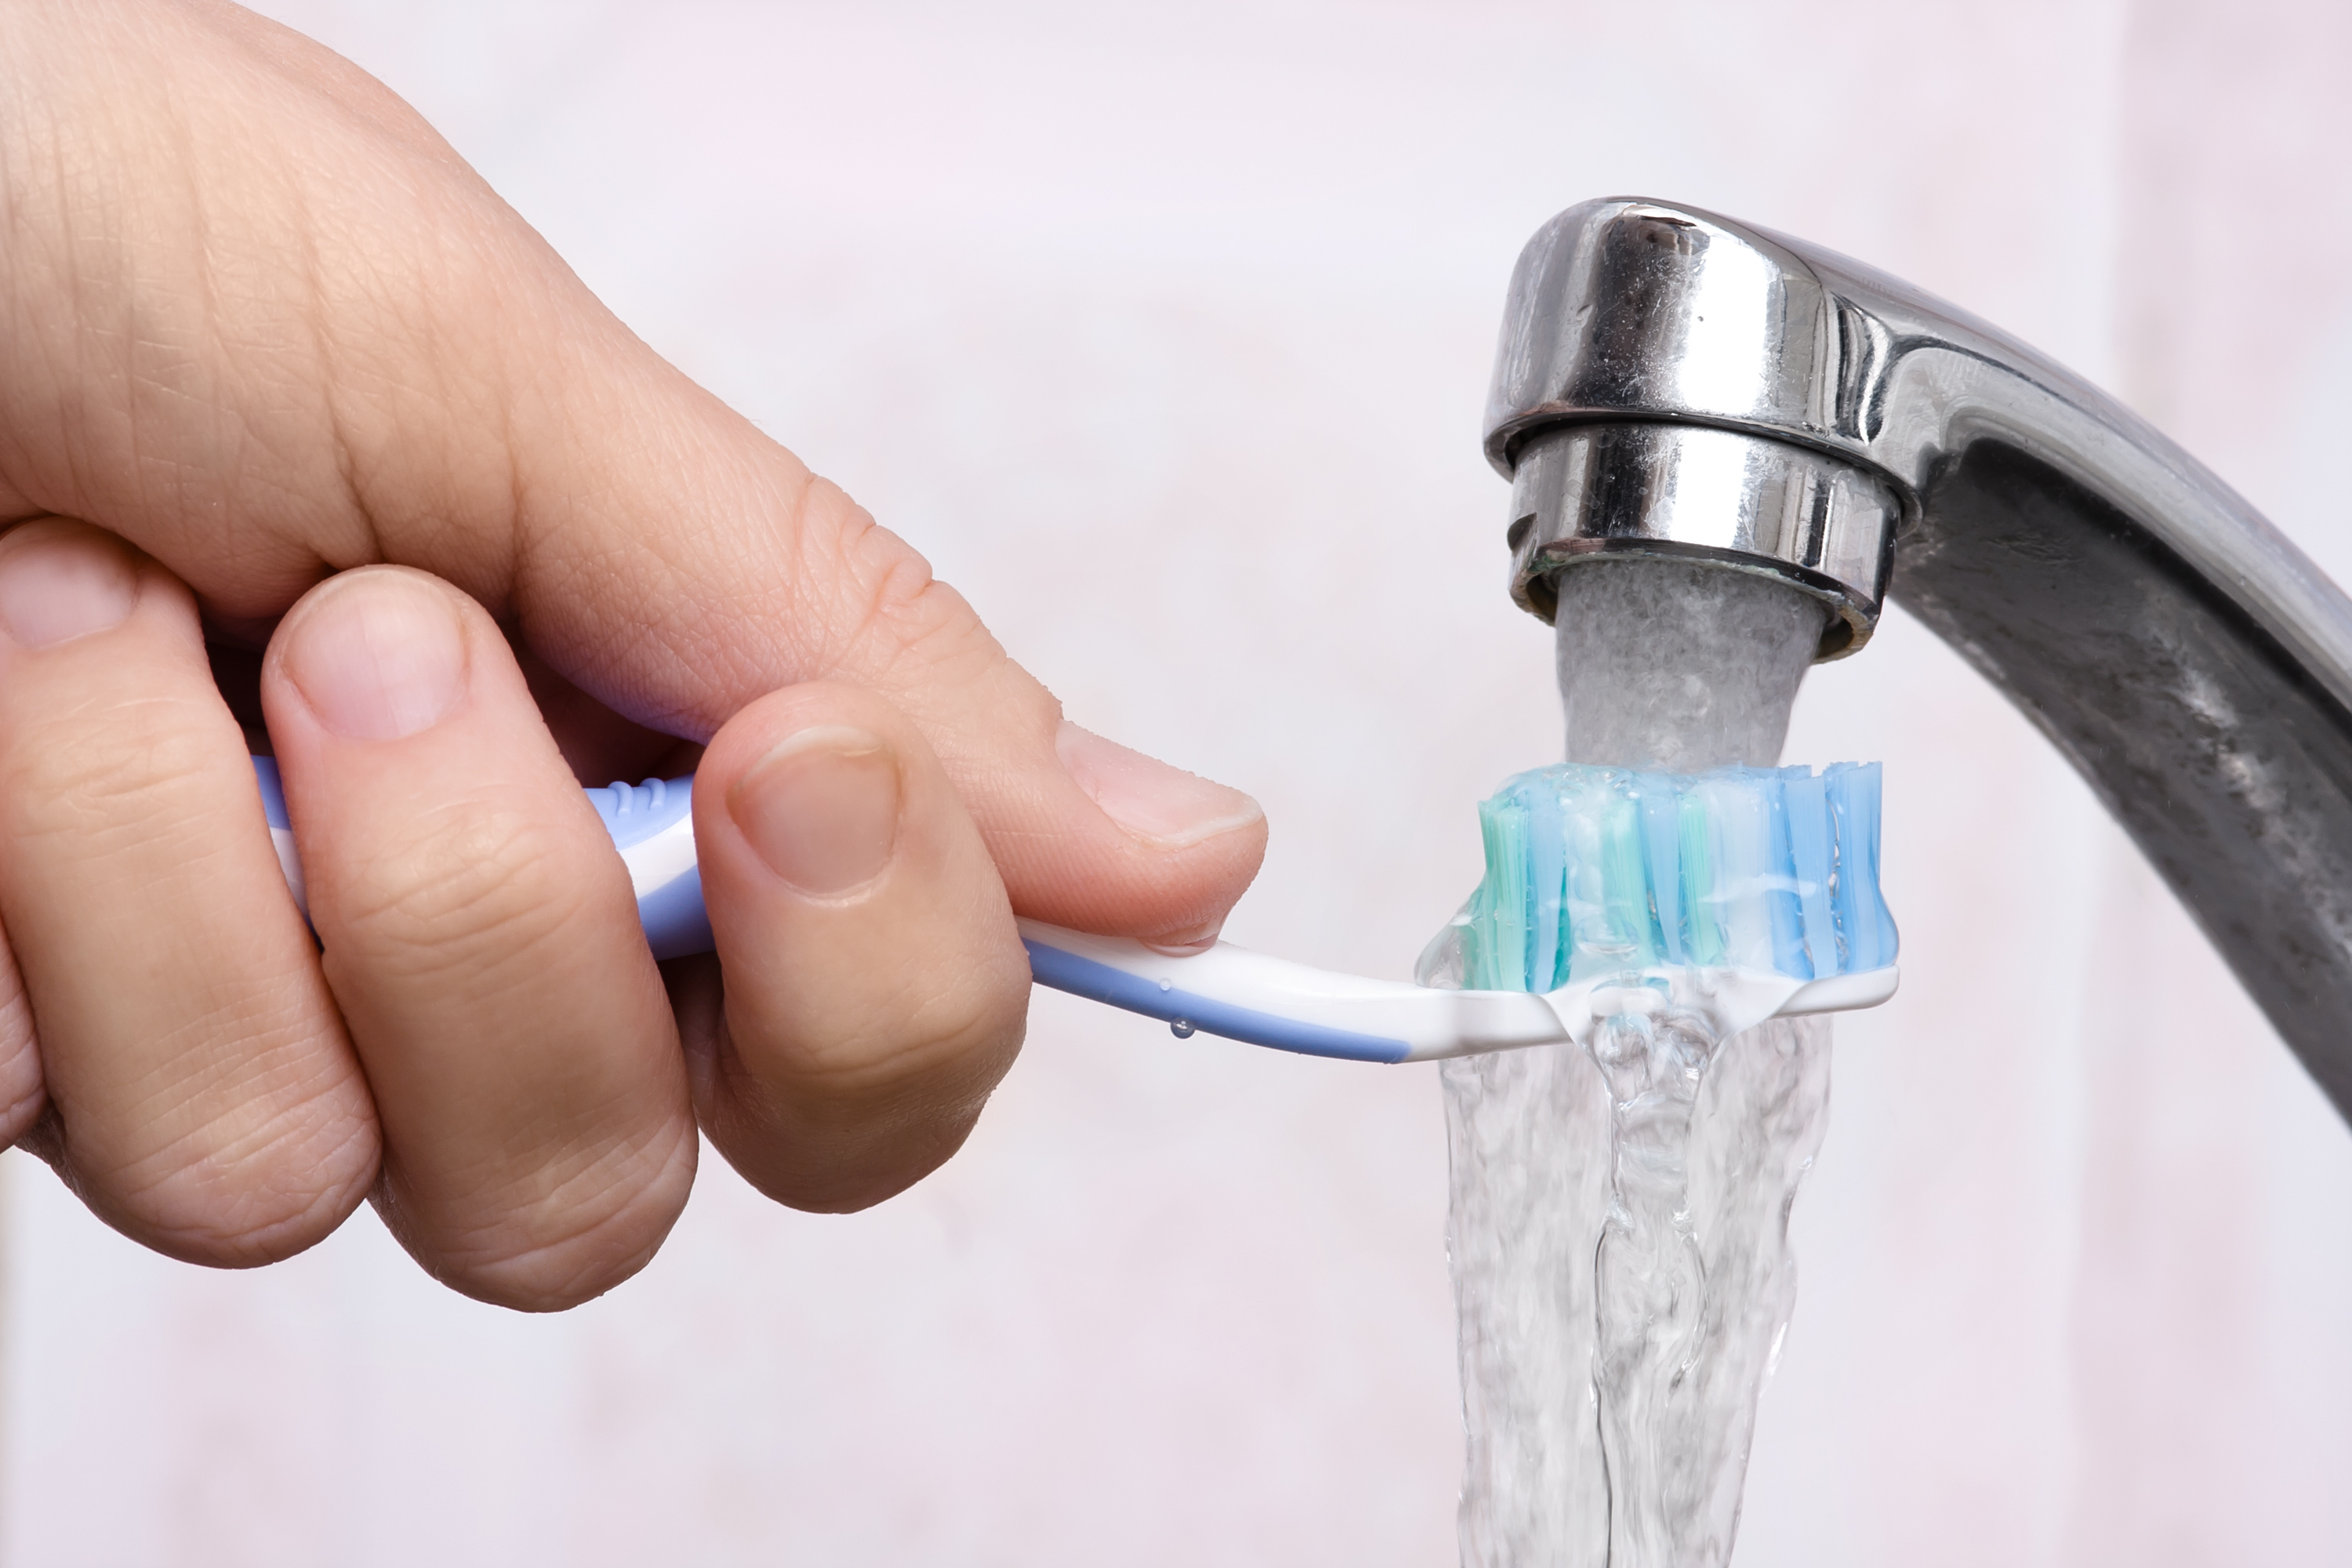 Man's Hand Holding a Toothbrush Under Running Water